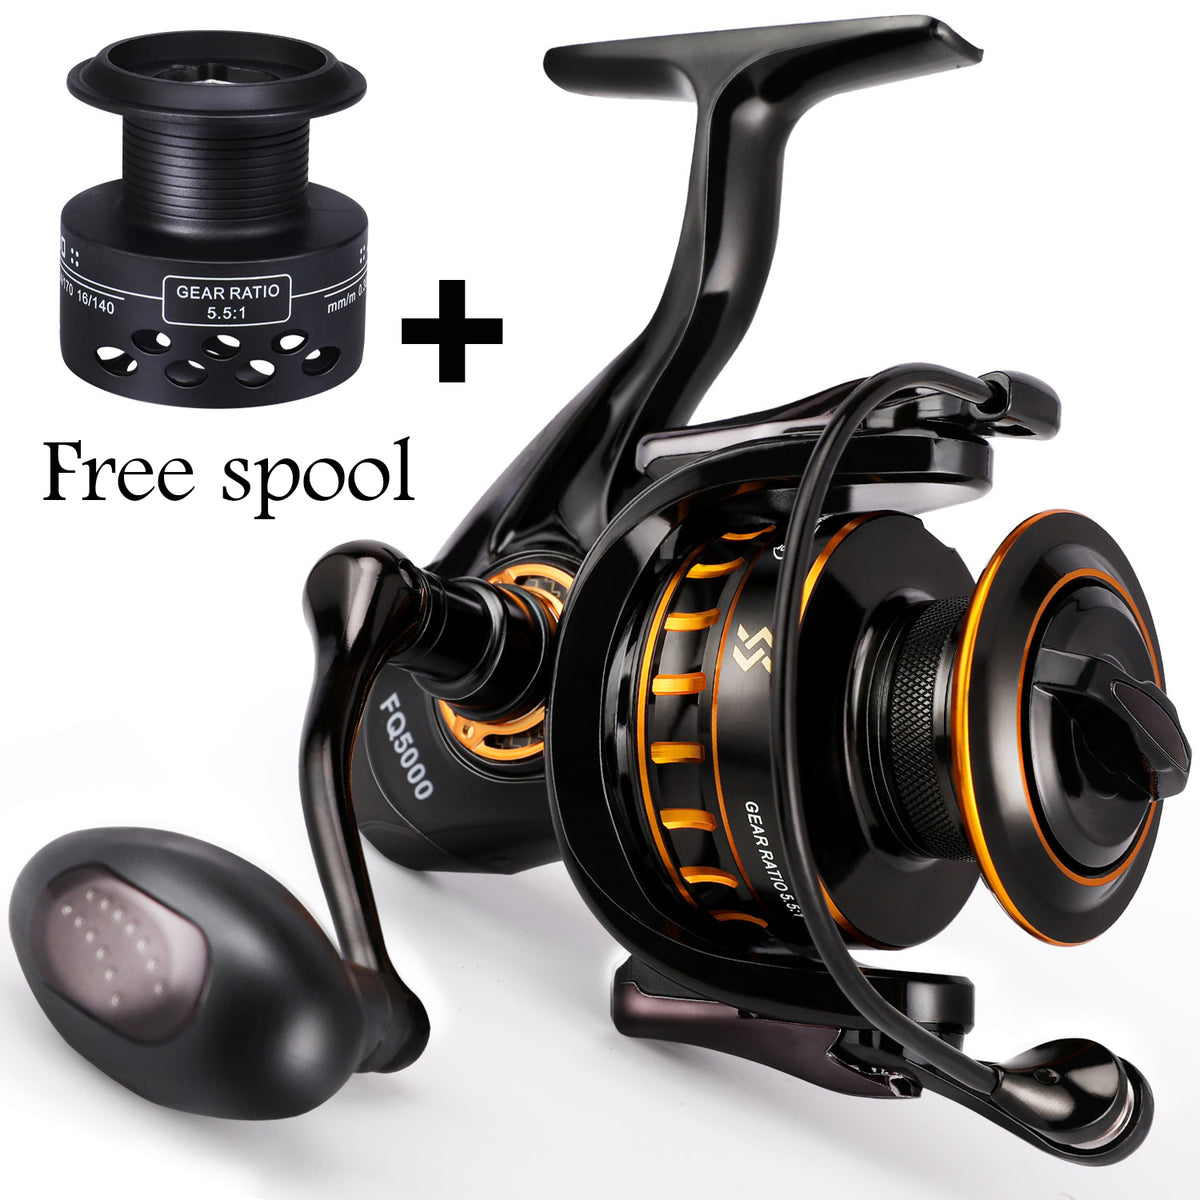  Sougayilang Spinning Fishing Reel,12+1BB Metal Body Smooth,  Carp Spinning Reels, for Saltwater and Freshwater Fishing-BE5000 : Sports &  Outdoors